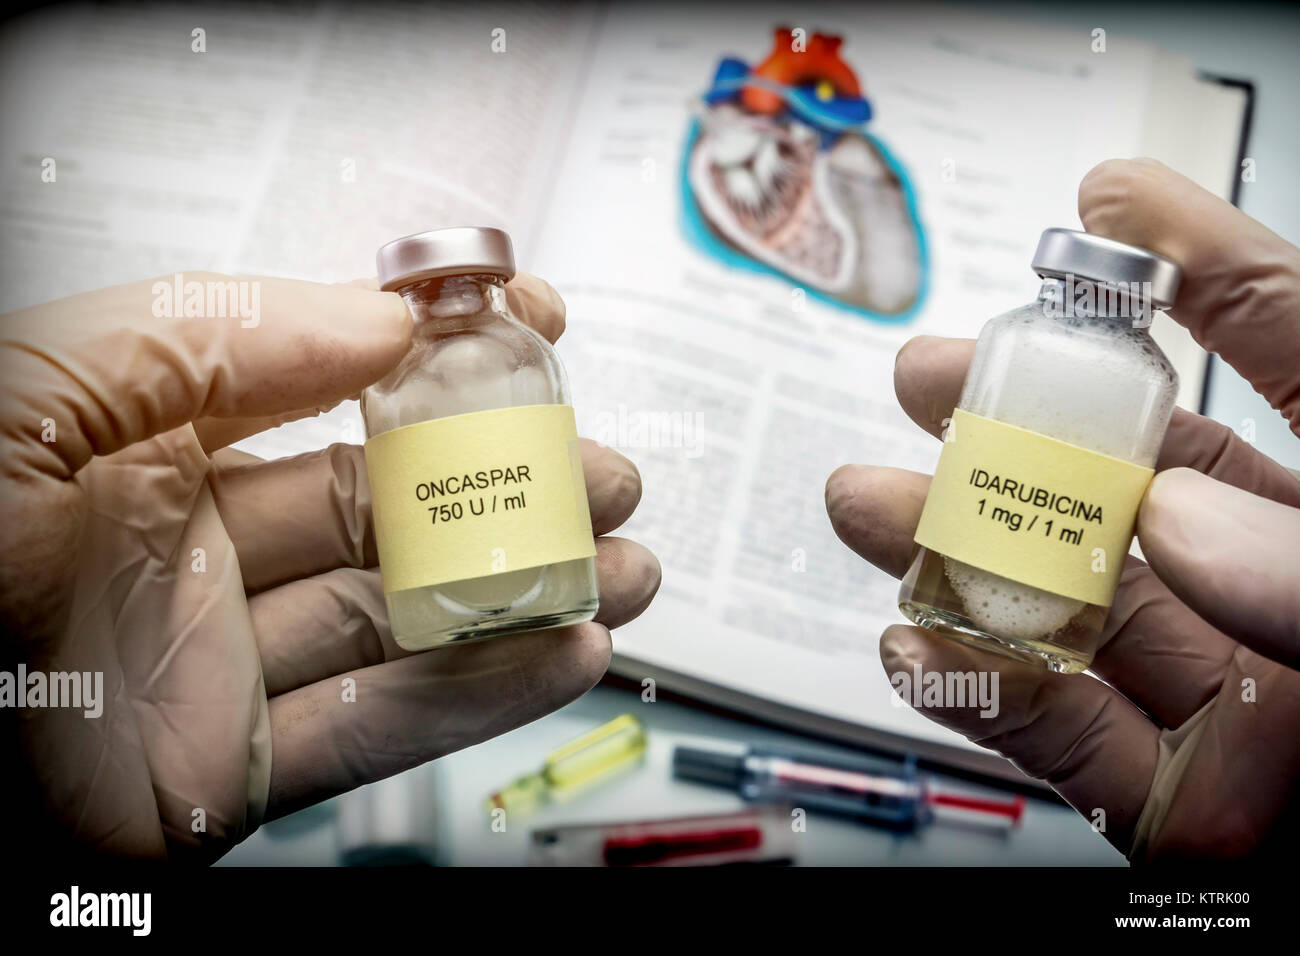 Doctor holds two vials of idarubicina and Oncaspar to inject, medicine used in acute lymphatic leukemia disease Stock Photo